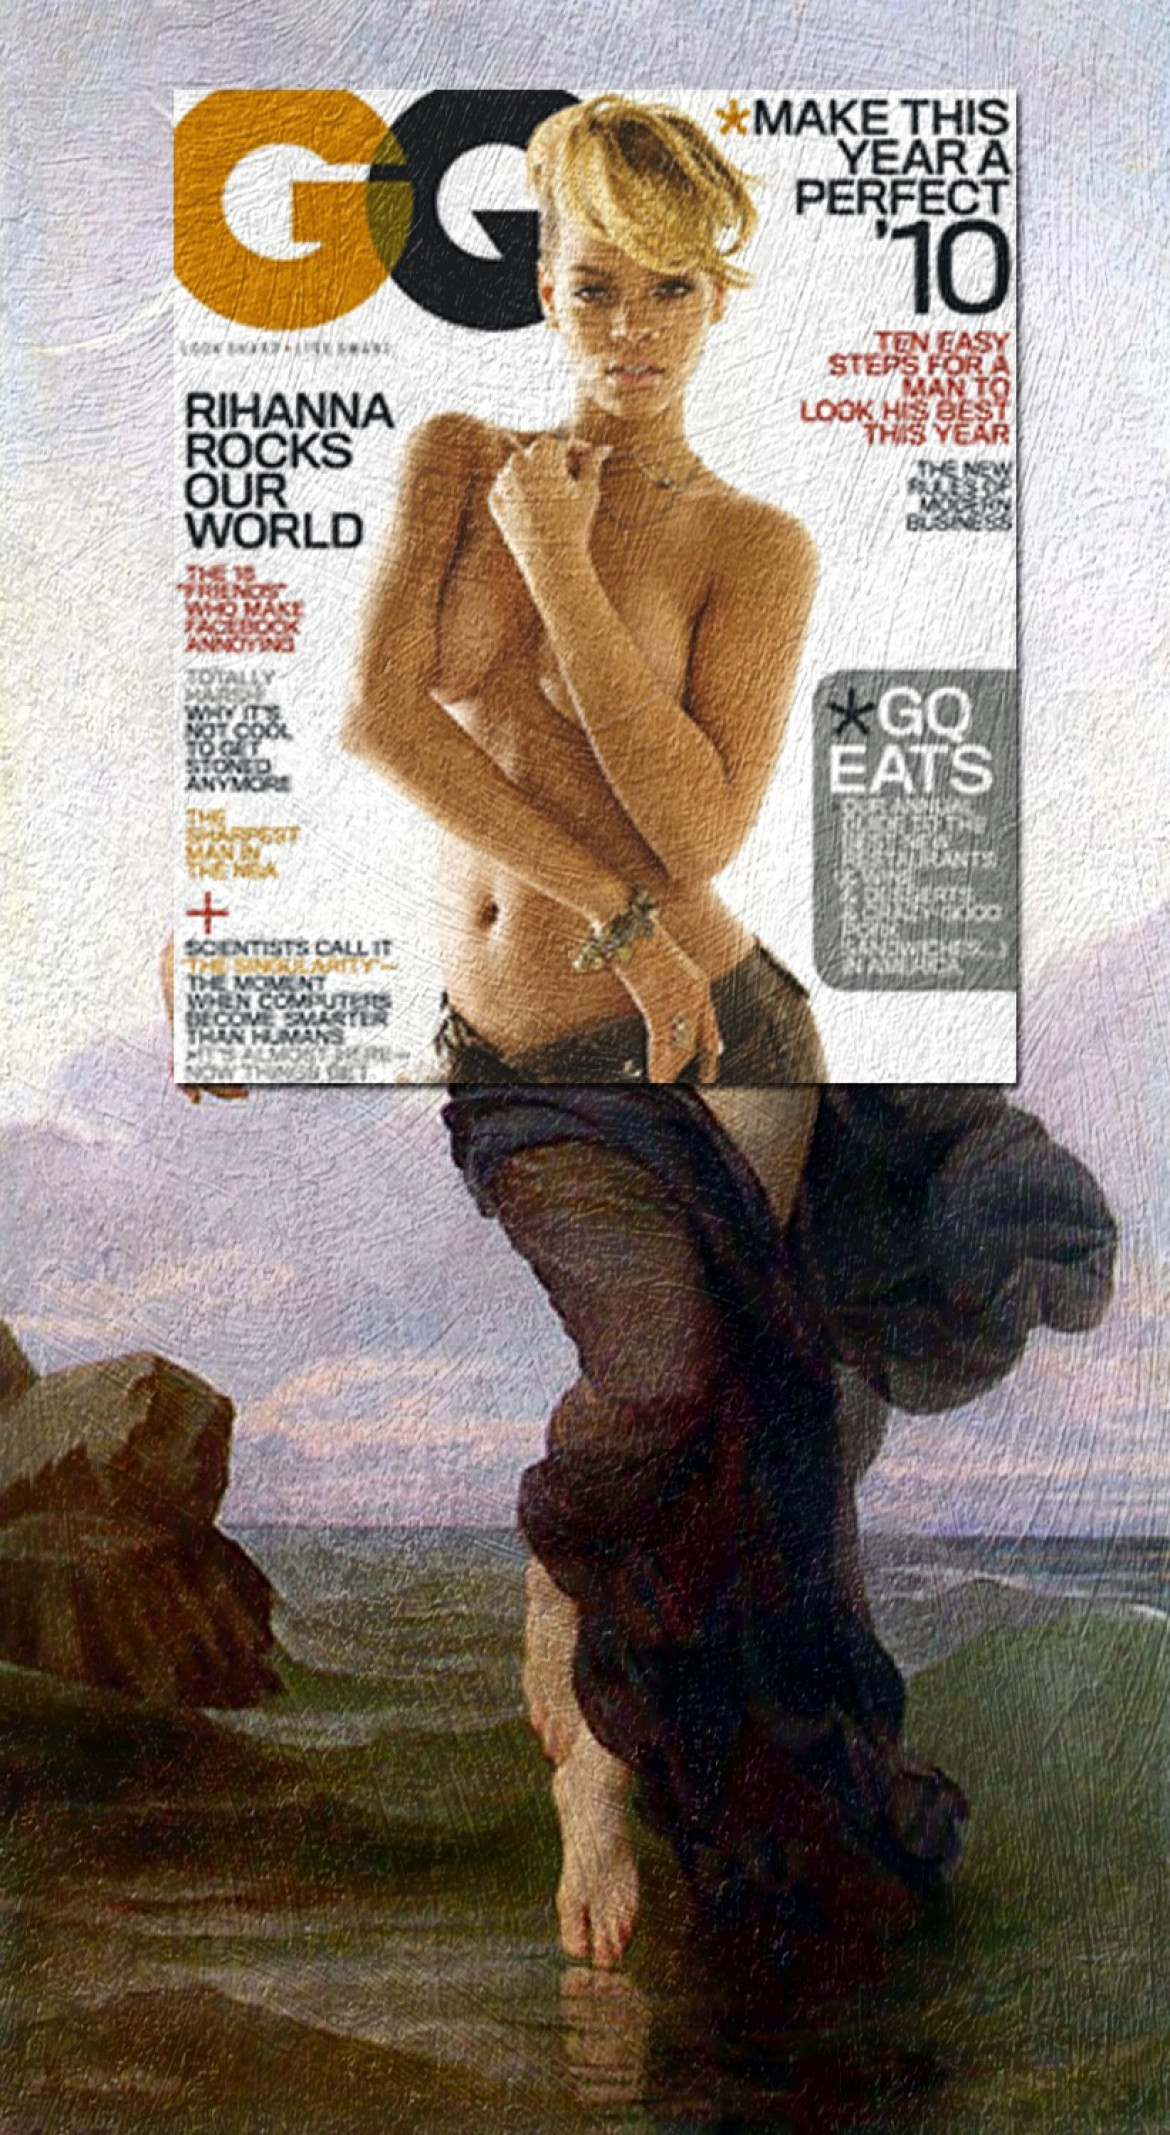 Rihanna, GQ January 2010 + Humeur Nocturne by William-Adolphe Bouguereau